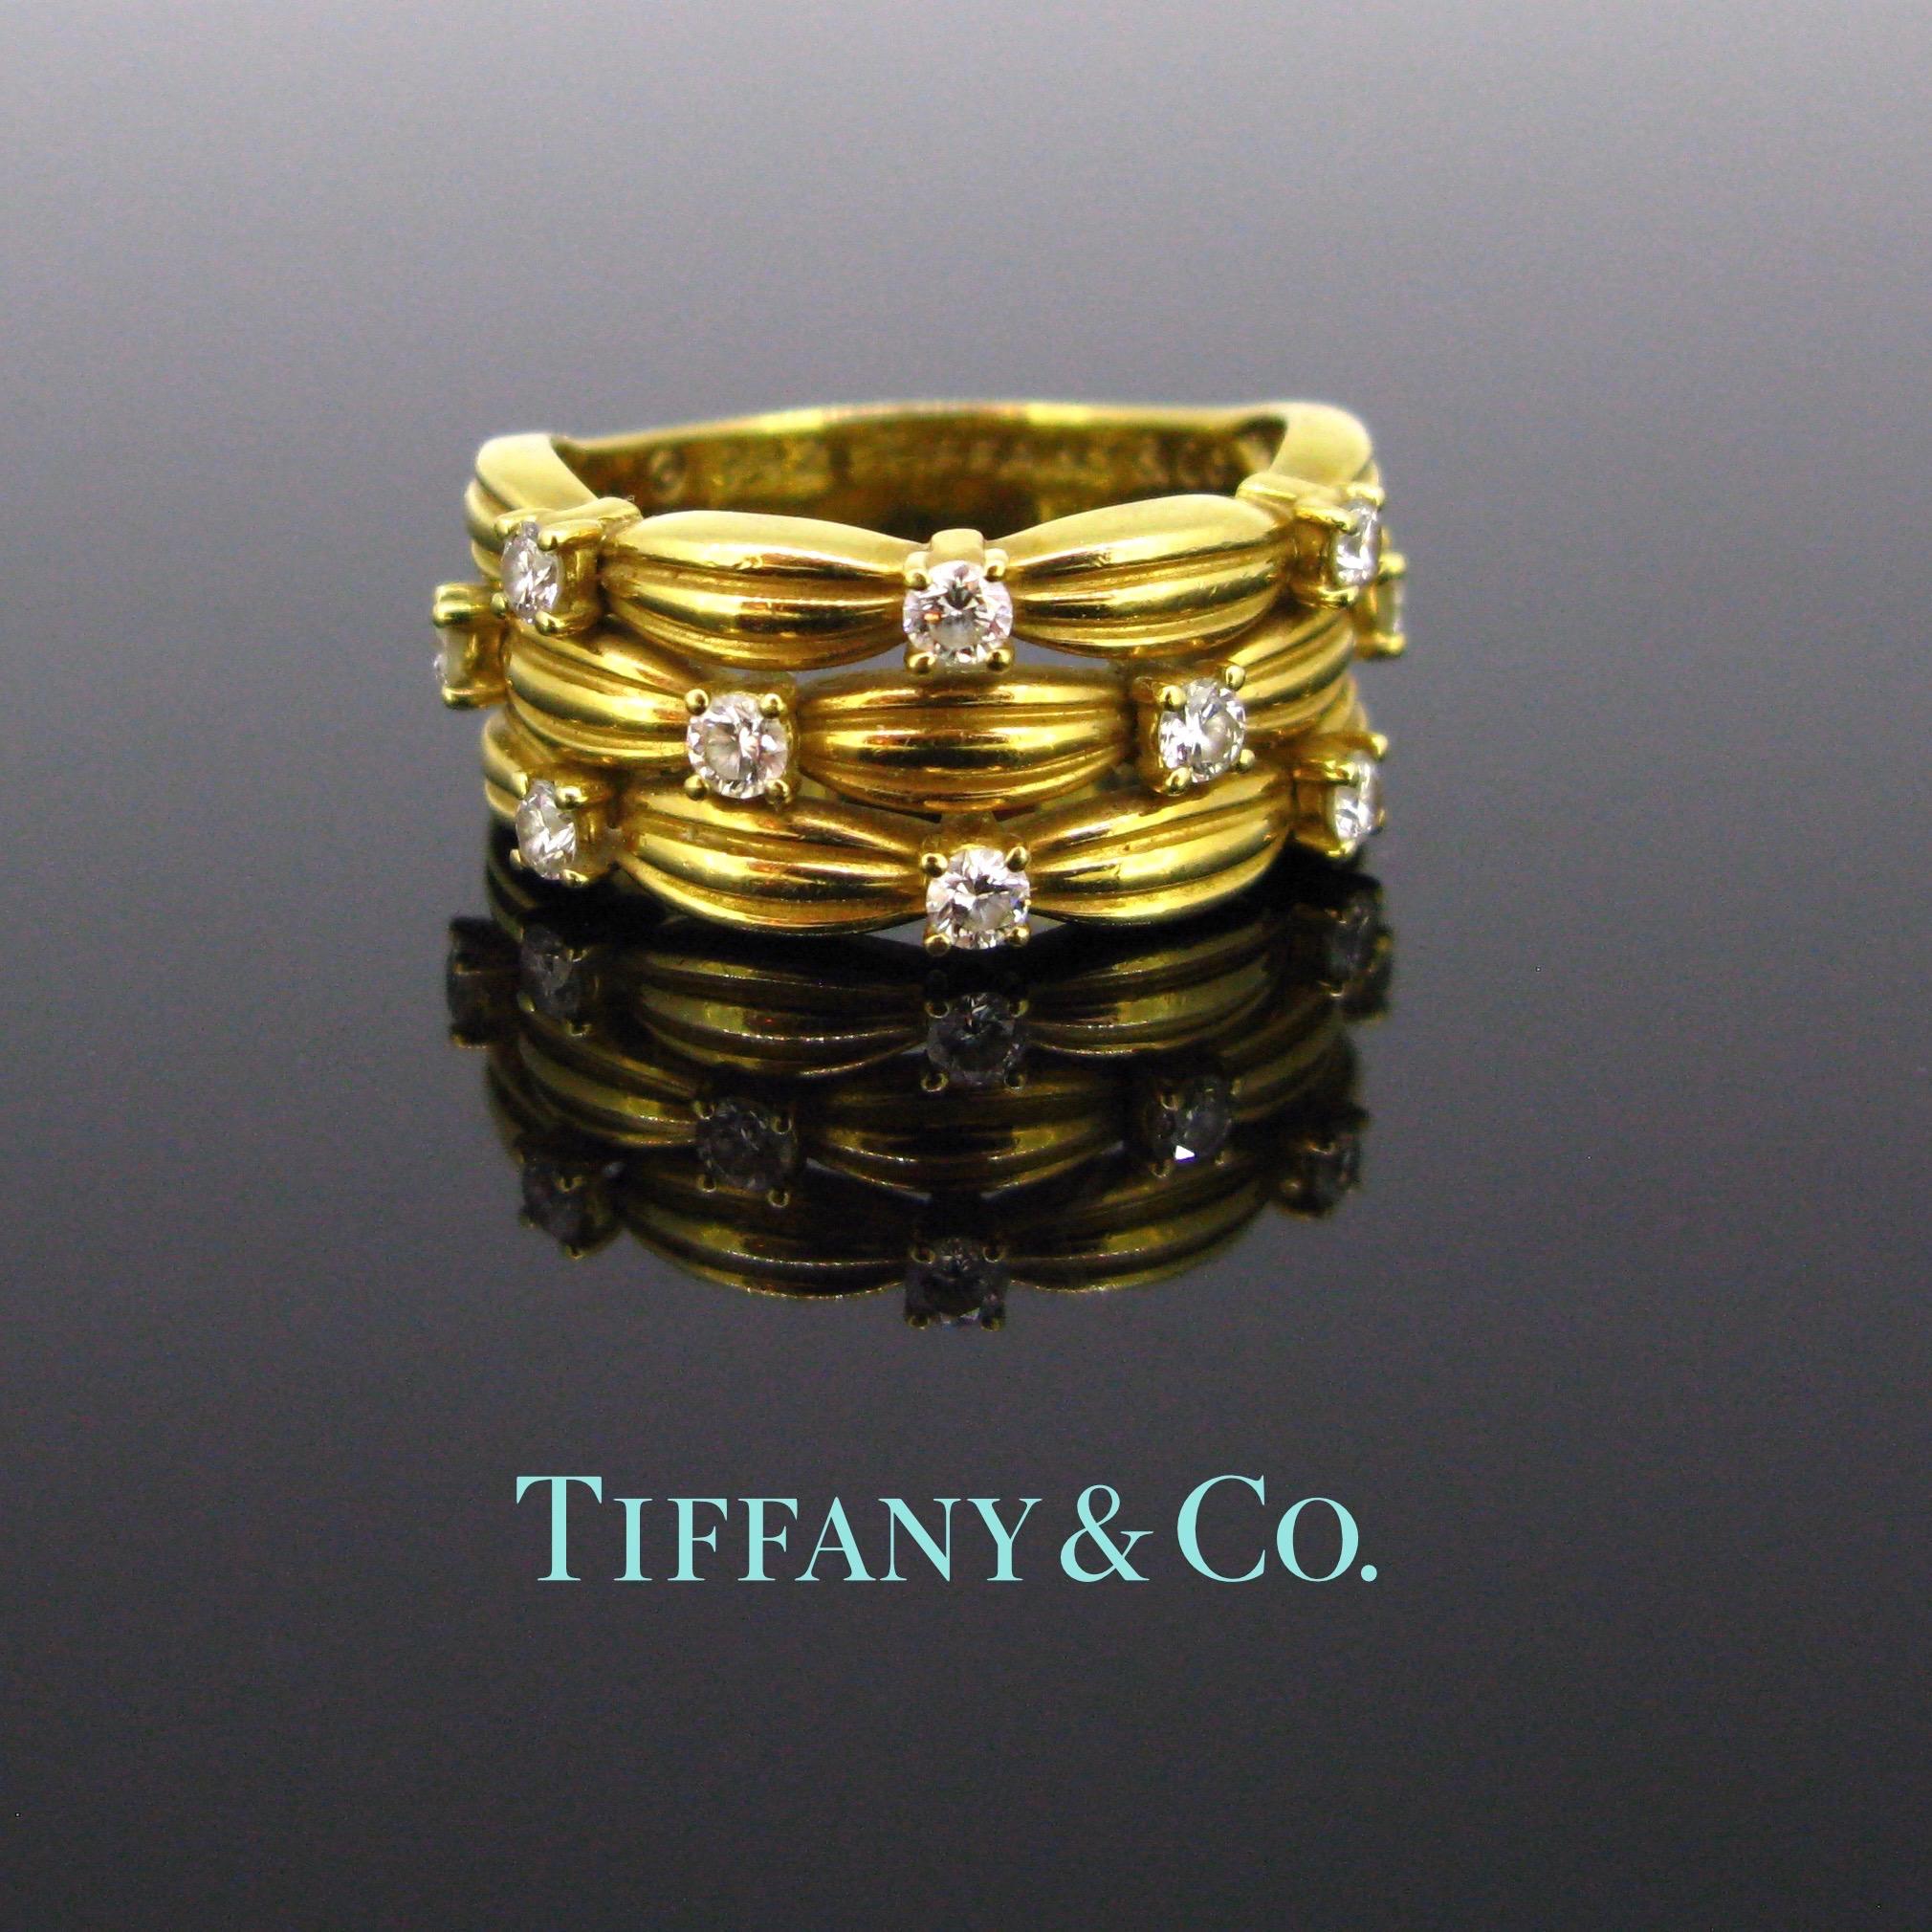 A classic vintage diamonds ring, made in 18kt yellow gold signed by Tiffany & Co. It belongs to the Signature Serie collection, created in 1992. It features three ribbed bands to form a basket weave design. The front is adorned with brilliant cut